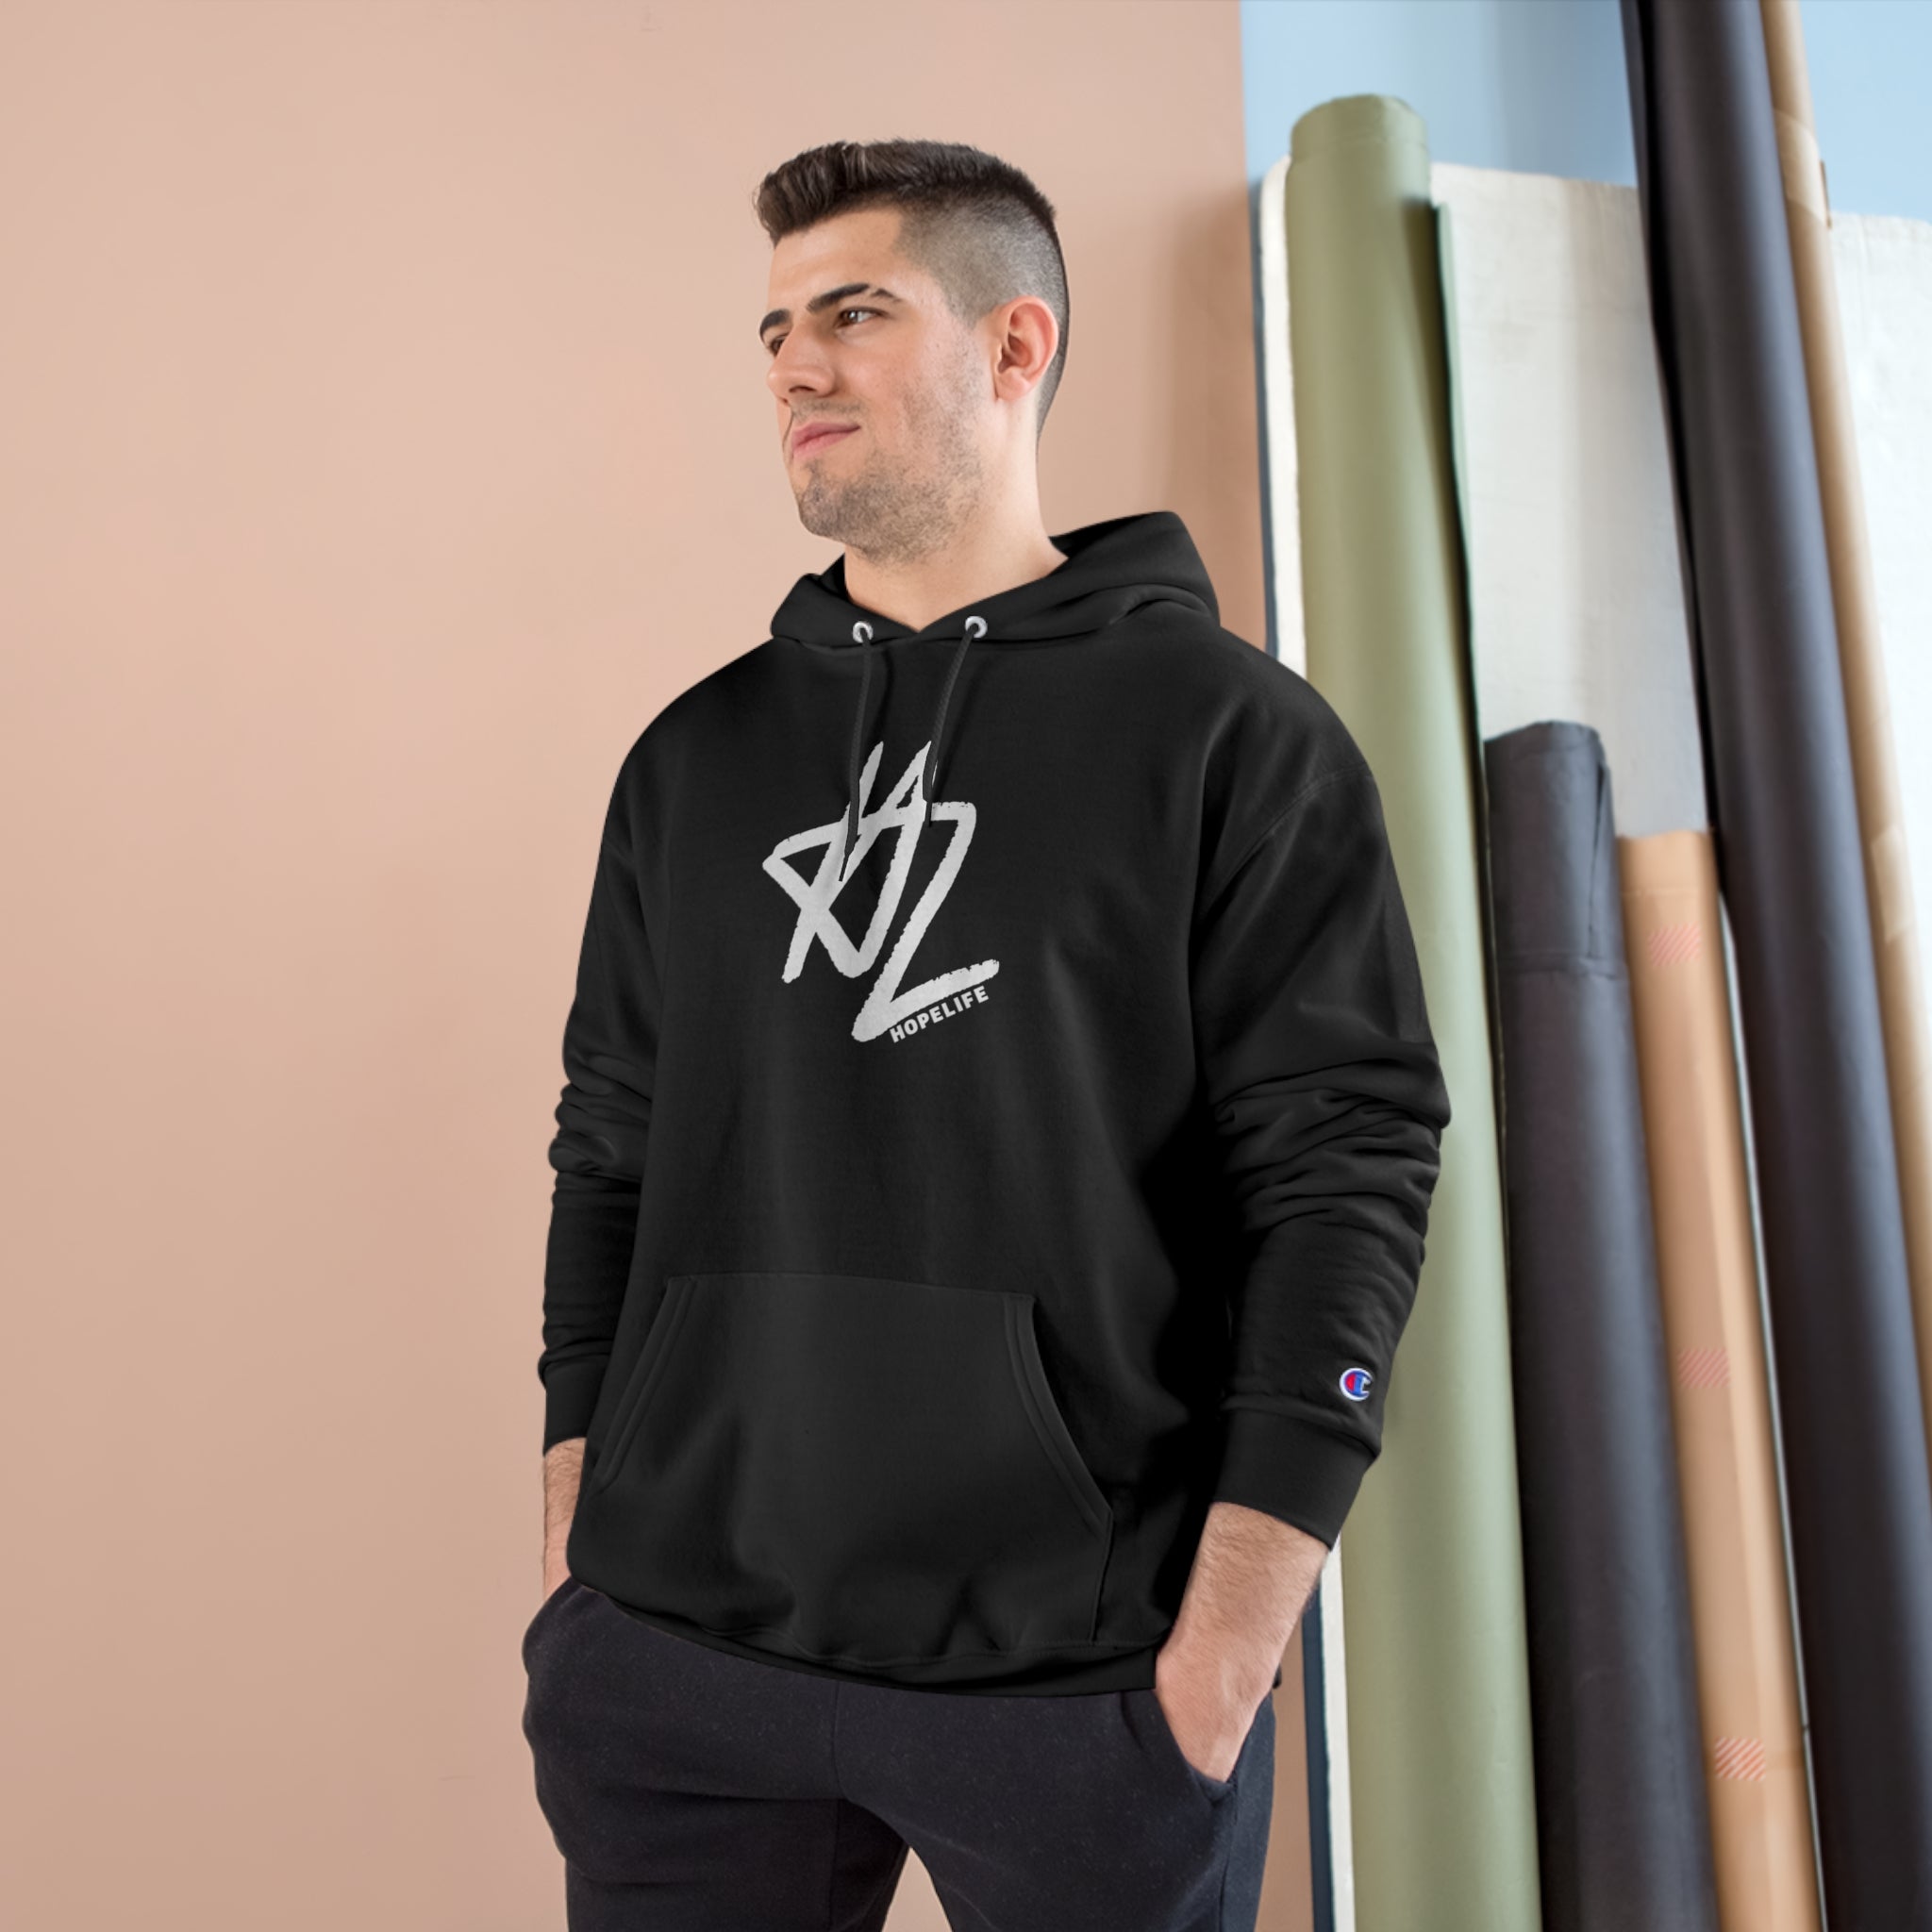 Pieces of Hope Champion Hoodie